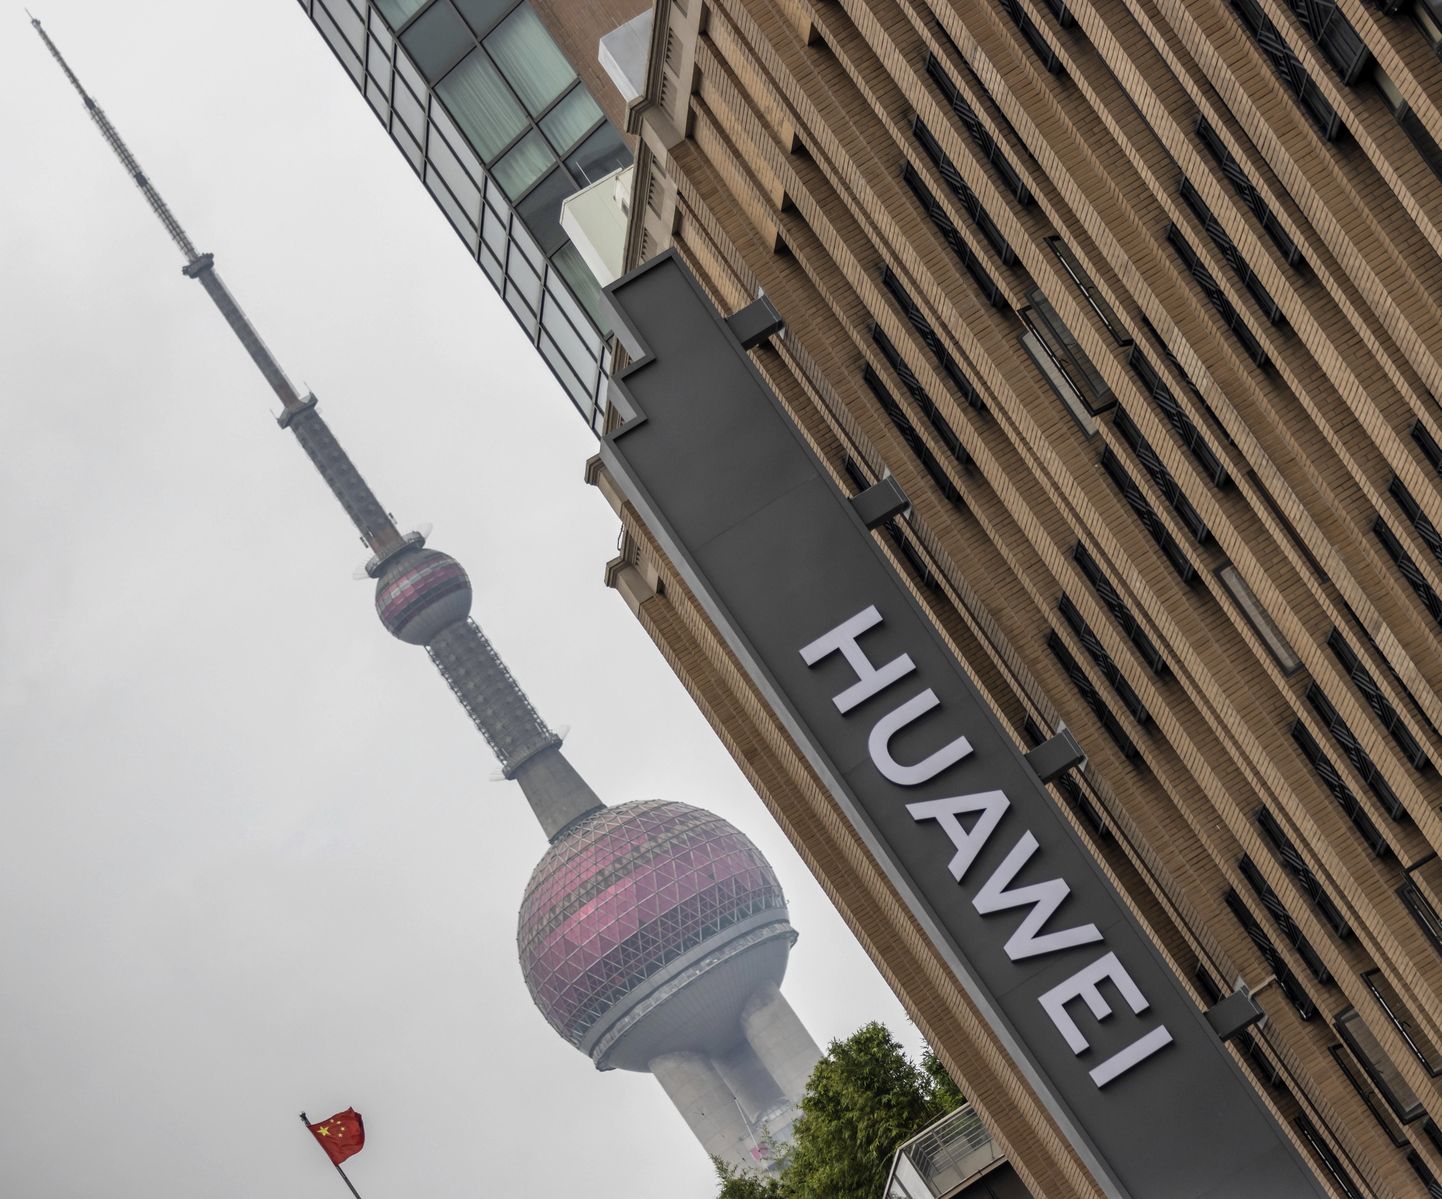 epa08549222 Huawei's newest flagship store building is seen in Shanghai, China, 16 July 2020. British digital secretary announced on 14 July 2020 that country's telecom network will not be allowed to purchase new Huawei 5G kit from 31 December and that all Huawei's equipment should be sorted out of UK's mobile networks by 2027. Chinese government 'strongly opposed groundless ban of Huawei's 5G kit'.  EPA/ALEX PLAVEVSKI